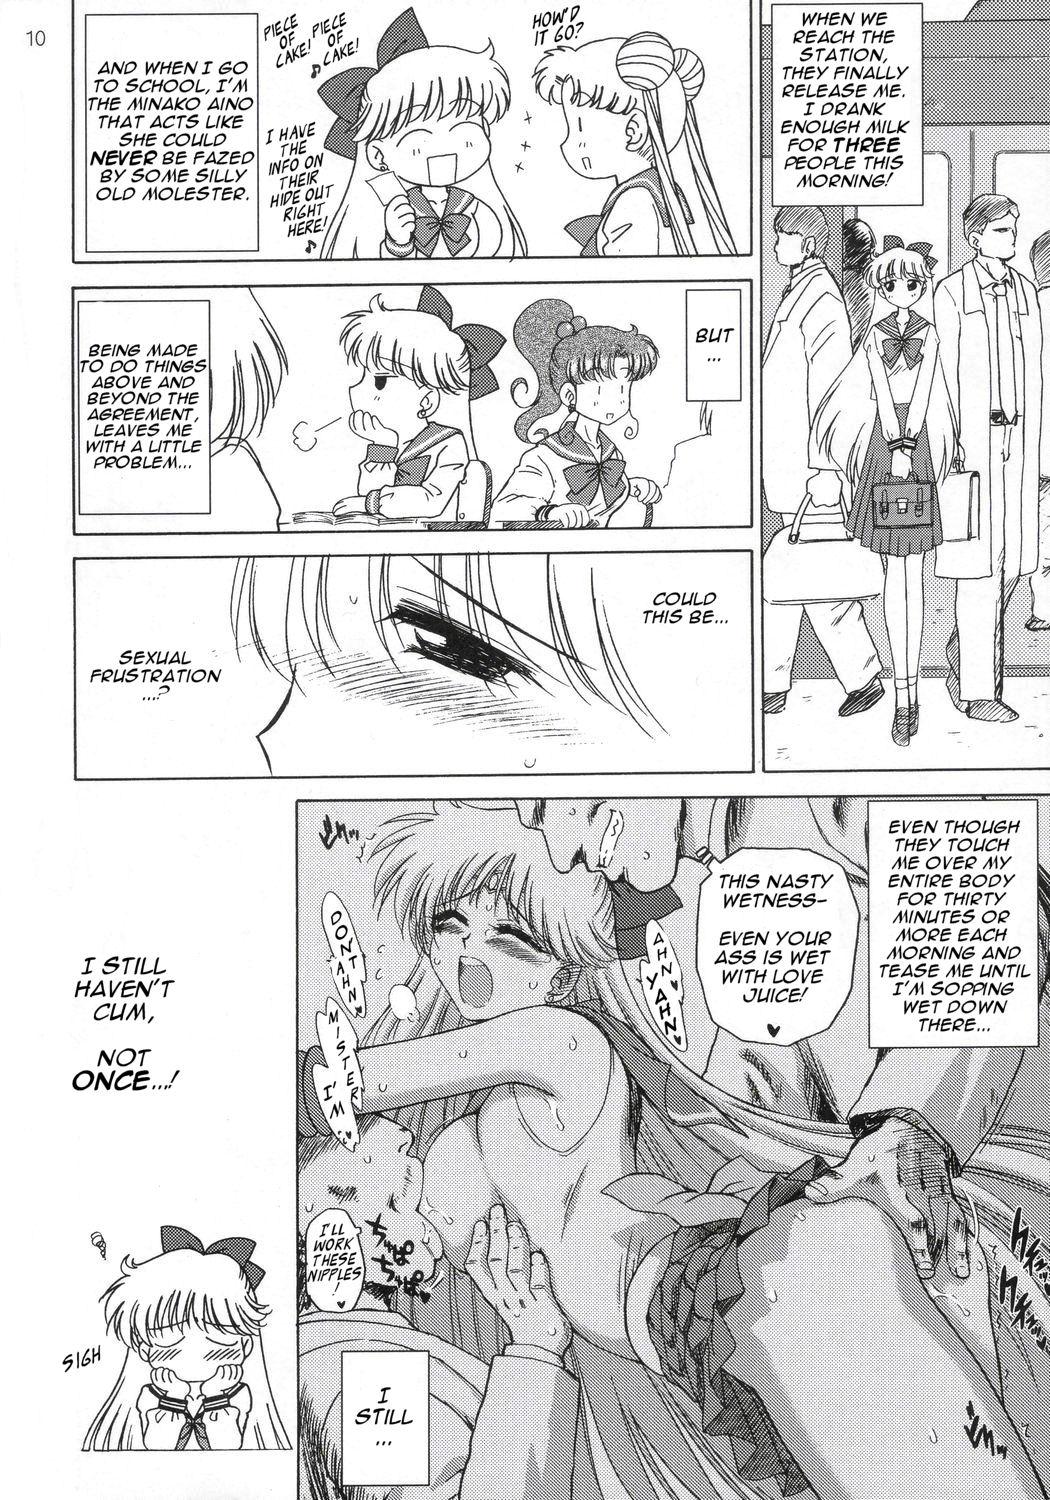 Best Blowjobs Super Fly - Sailor moon Threesome - Page 9